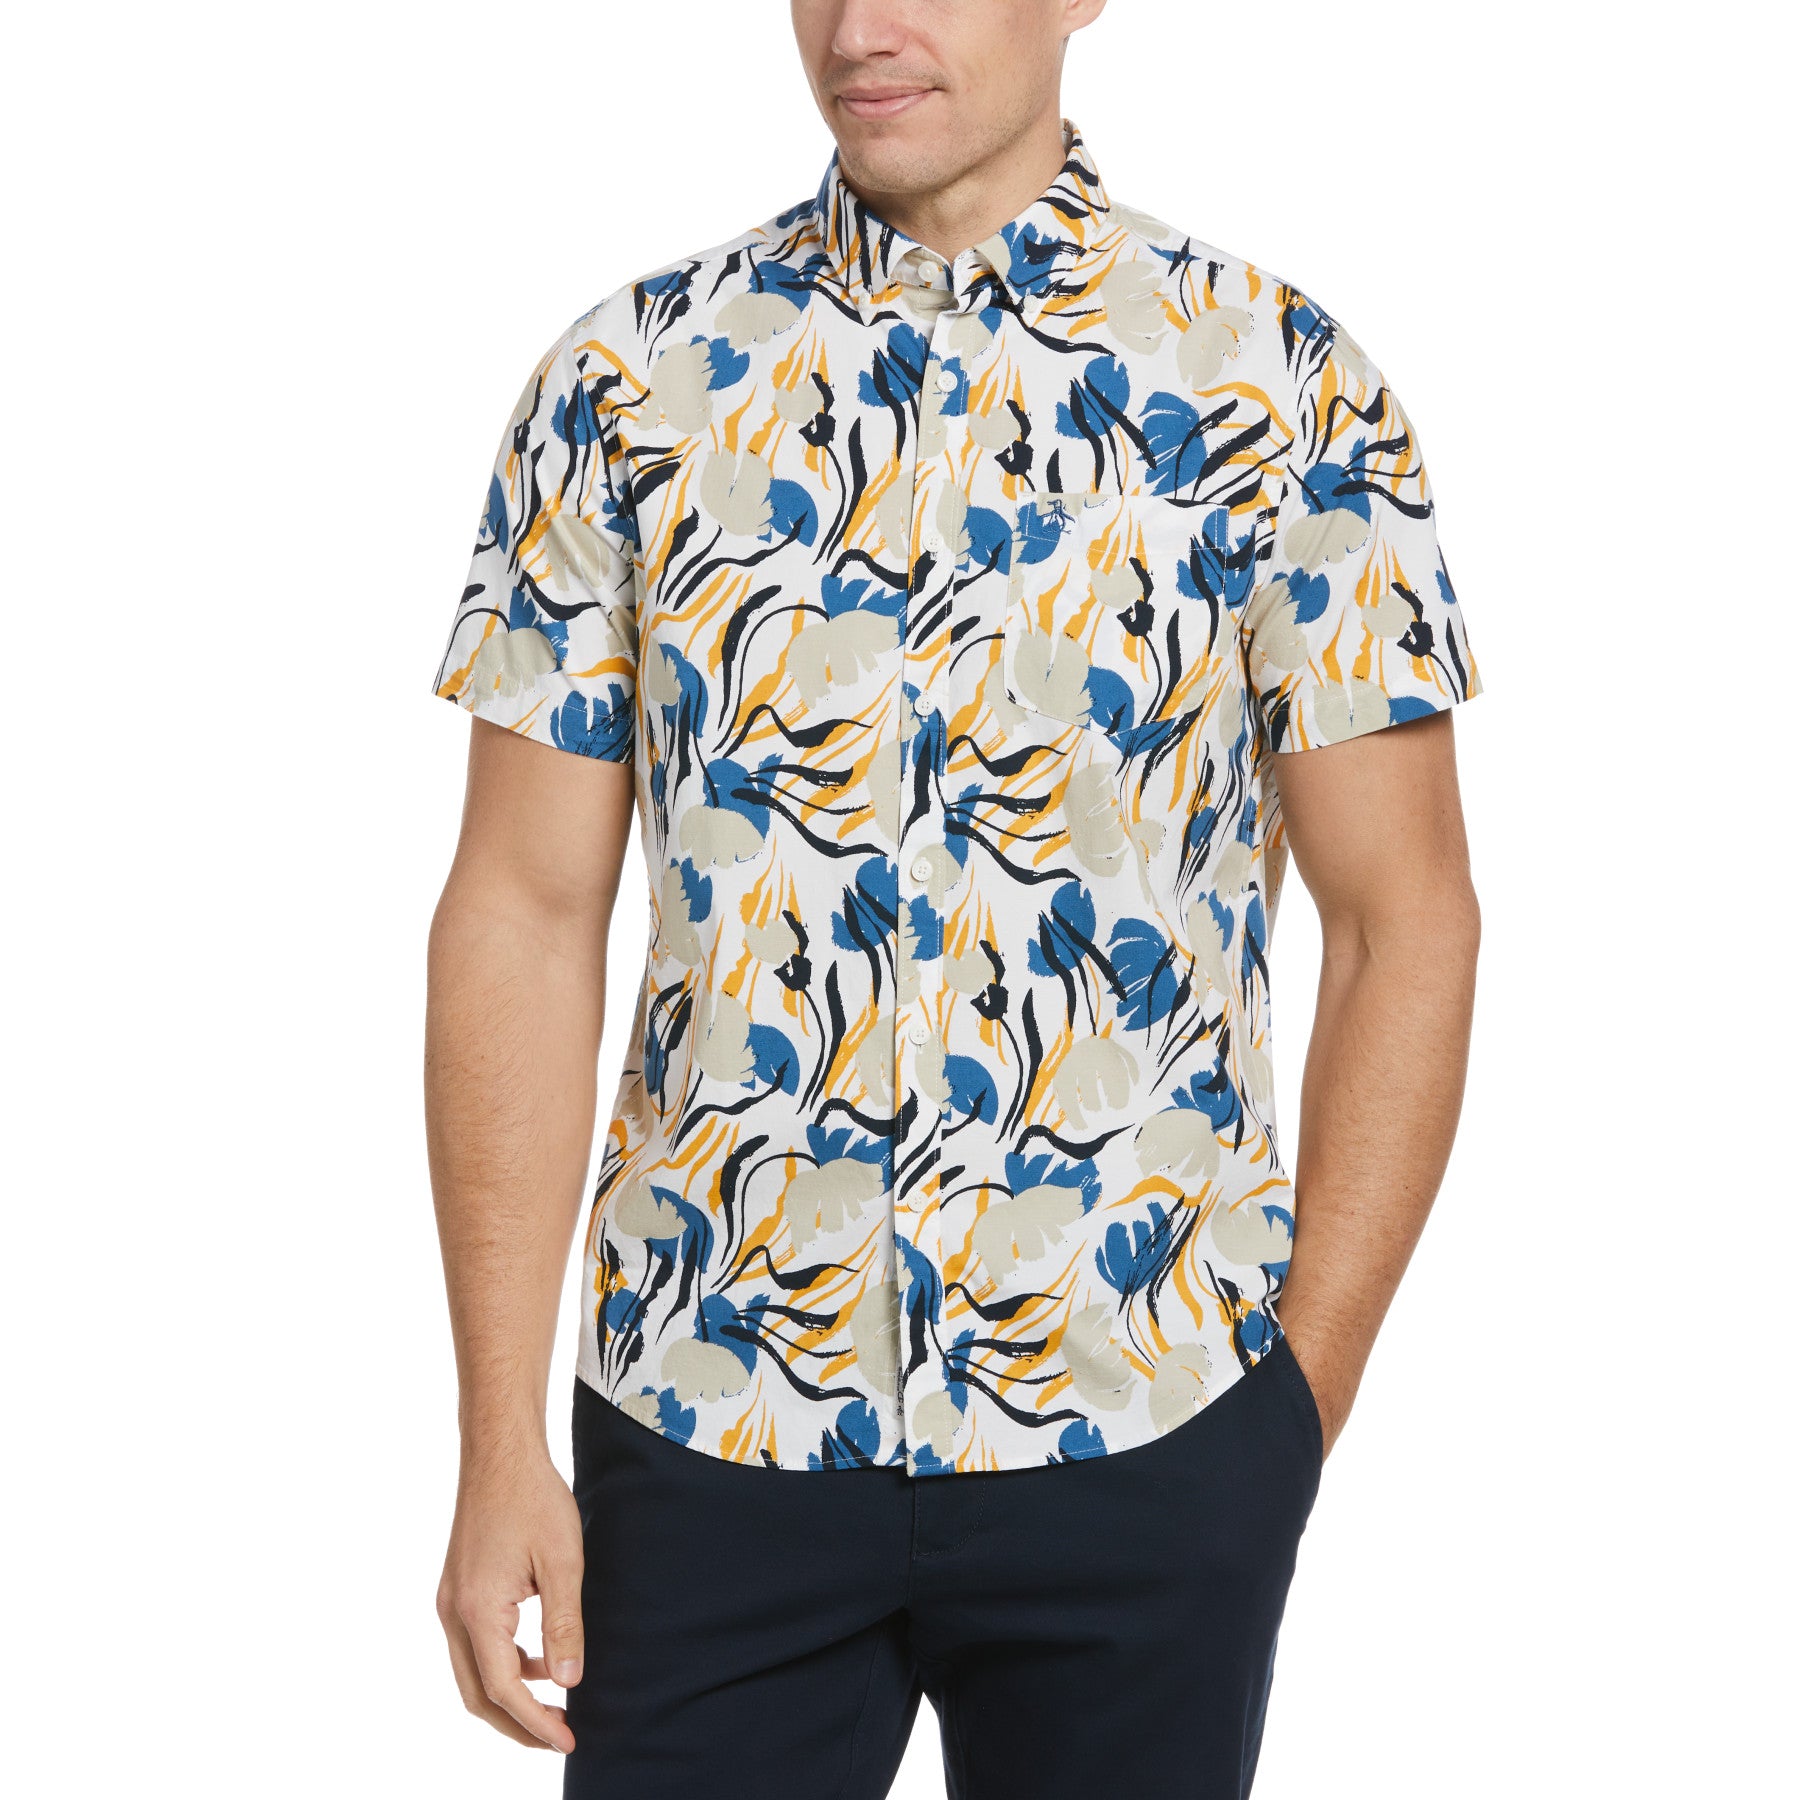 View Ecovero Blend Painted Floral Print Shirt In Bright White information